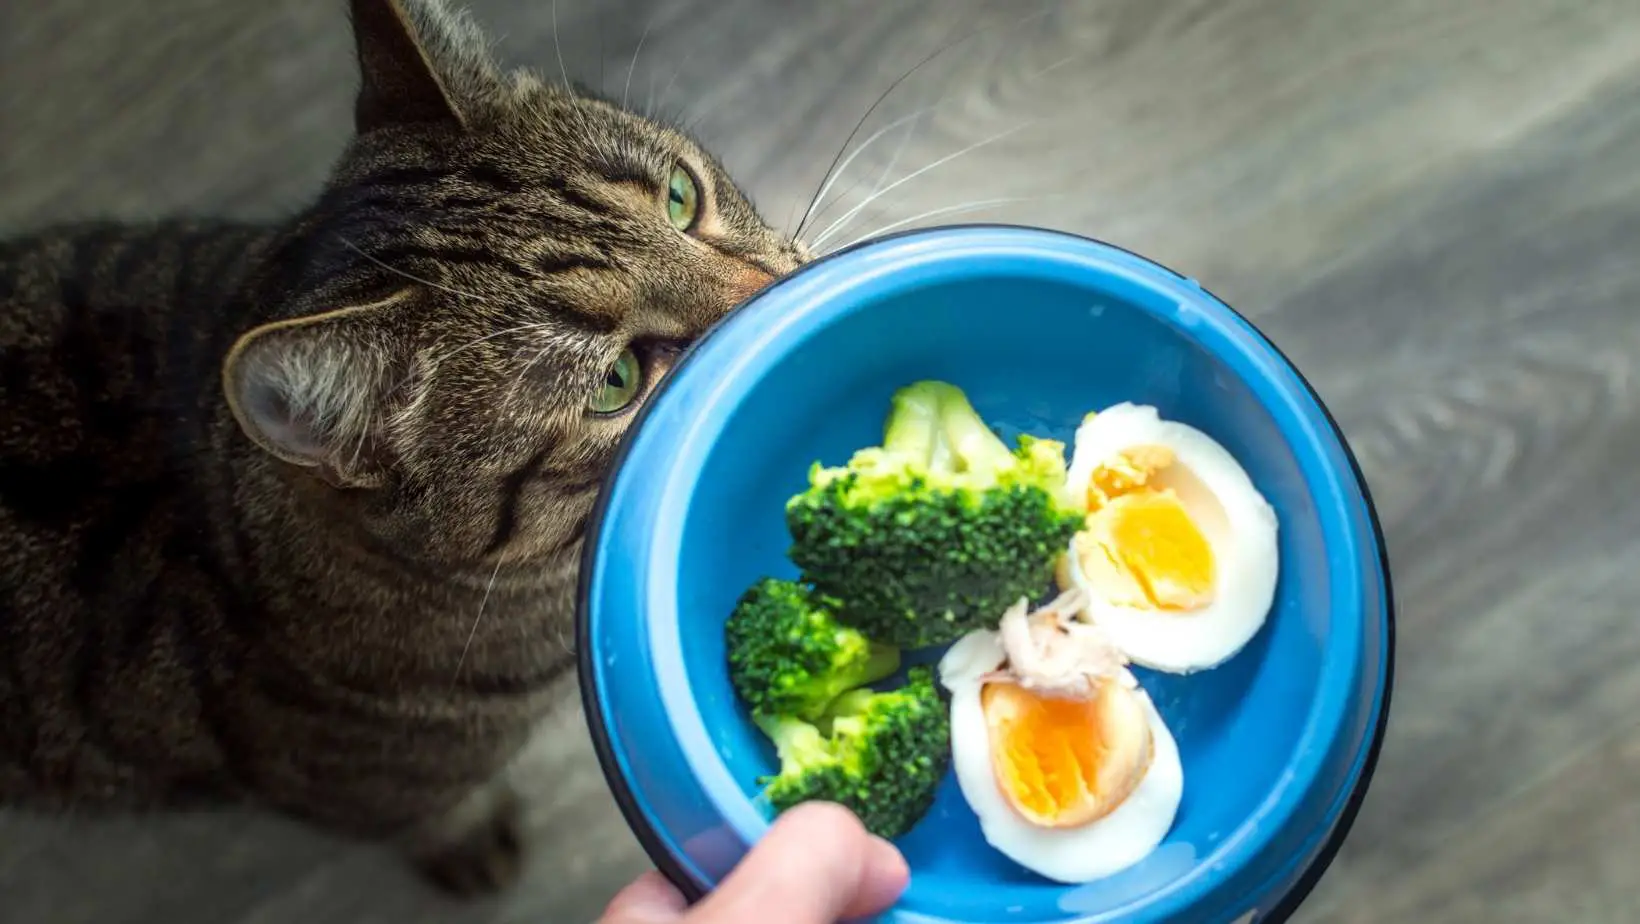 Meal That Heals – What Food Is Good For Cats with Allergies